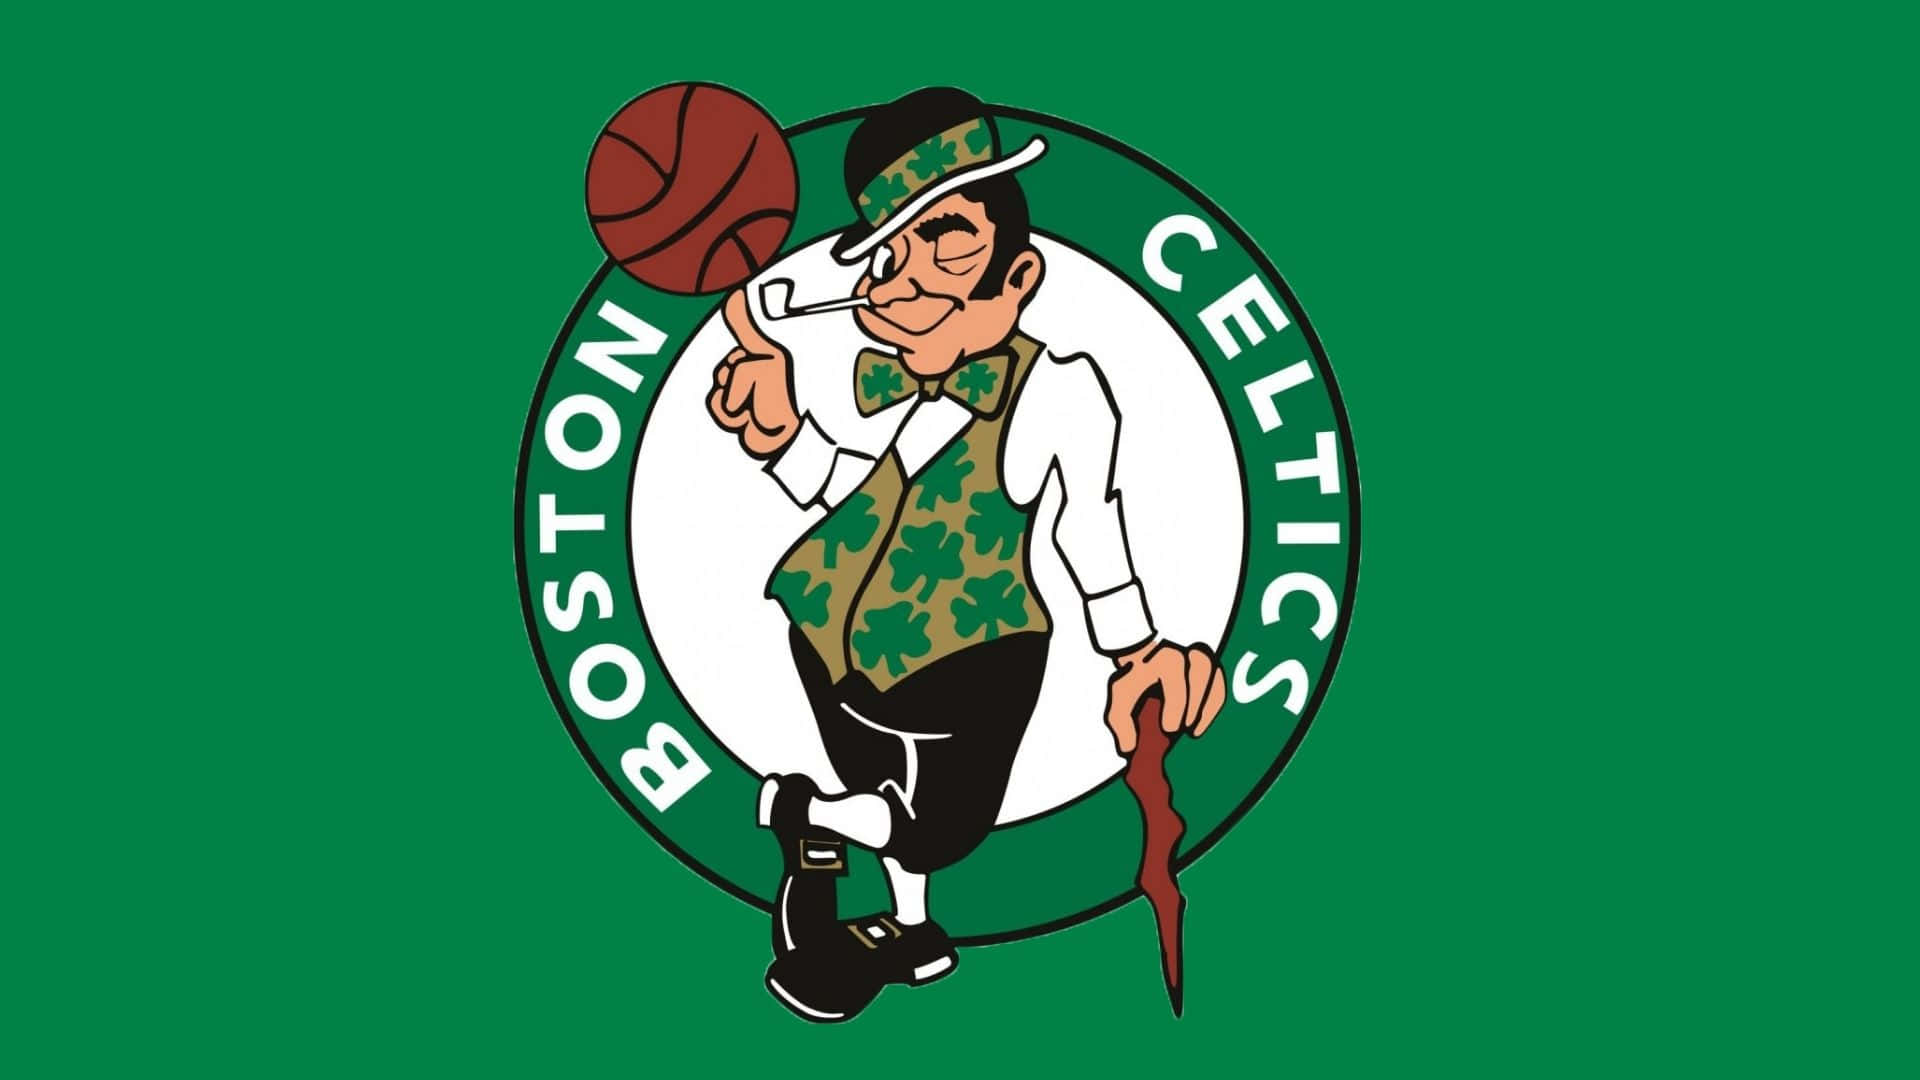 The iconic Celtics logo is instantly recognisable. Wallpaper